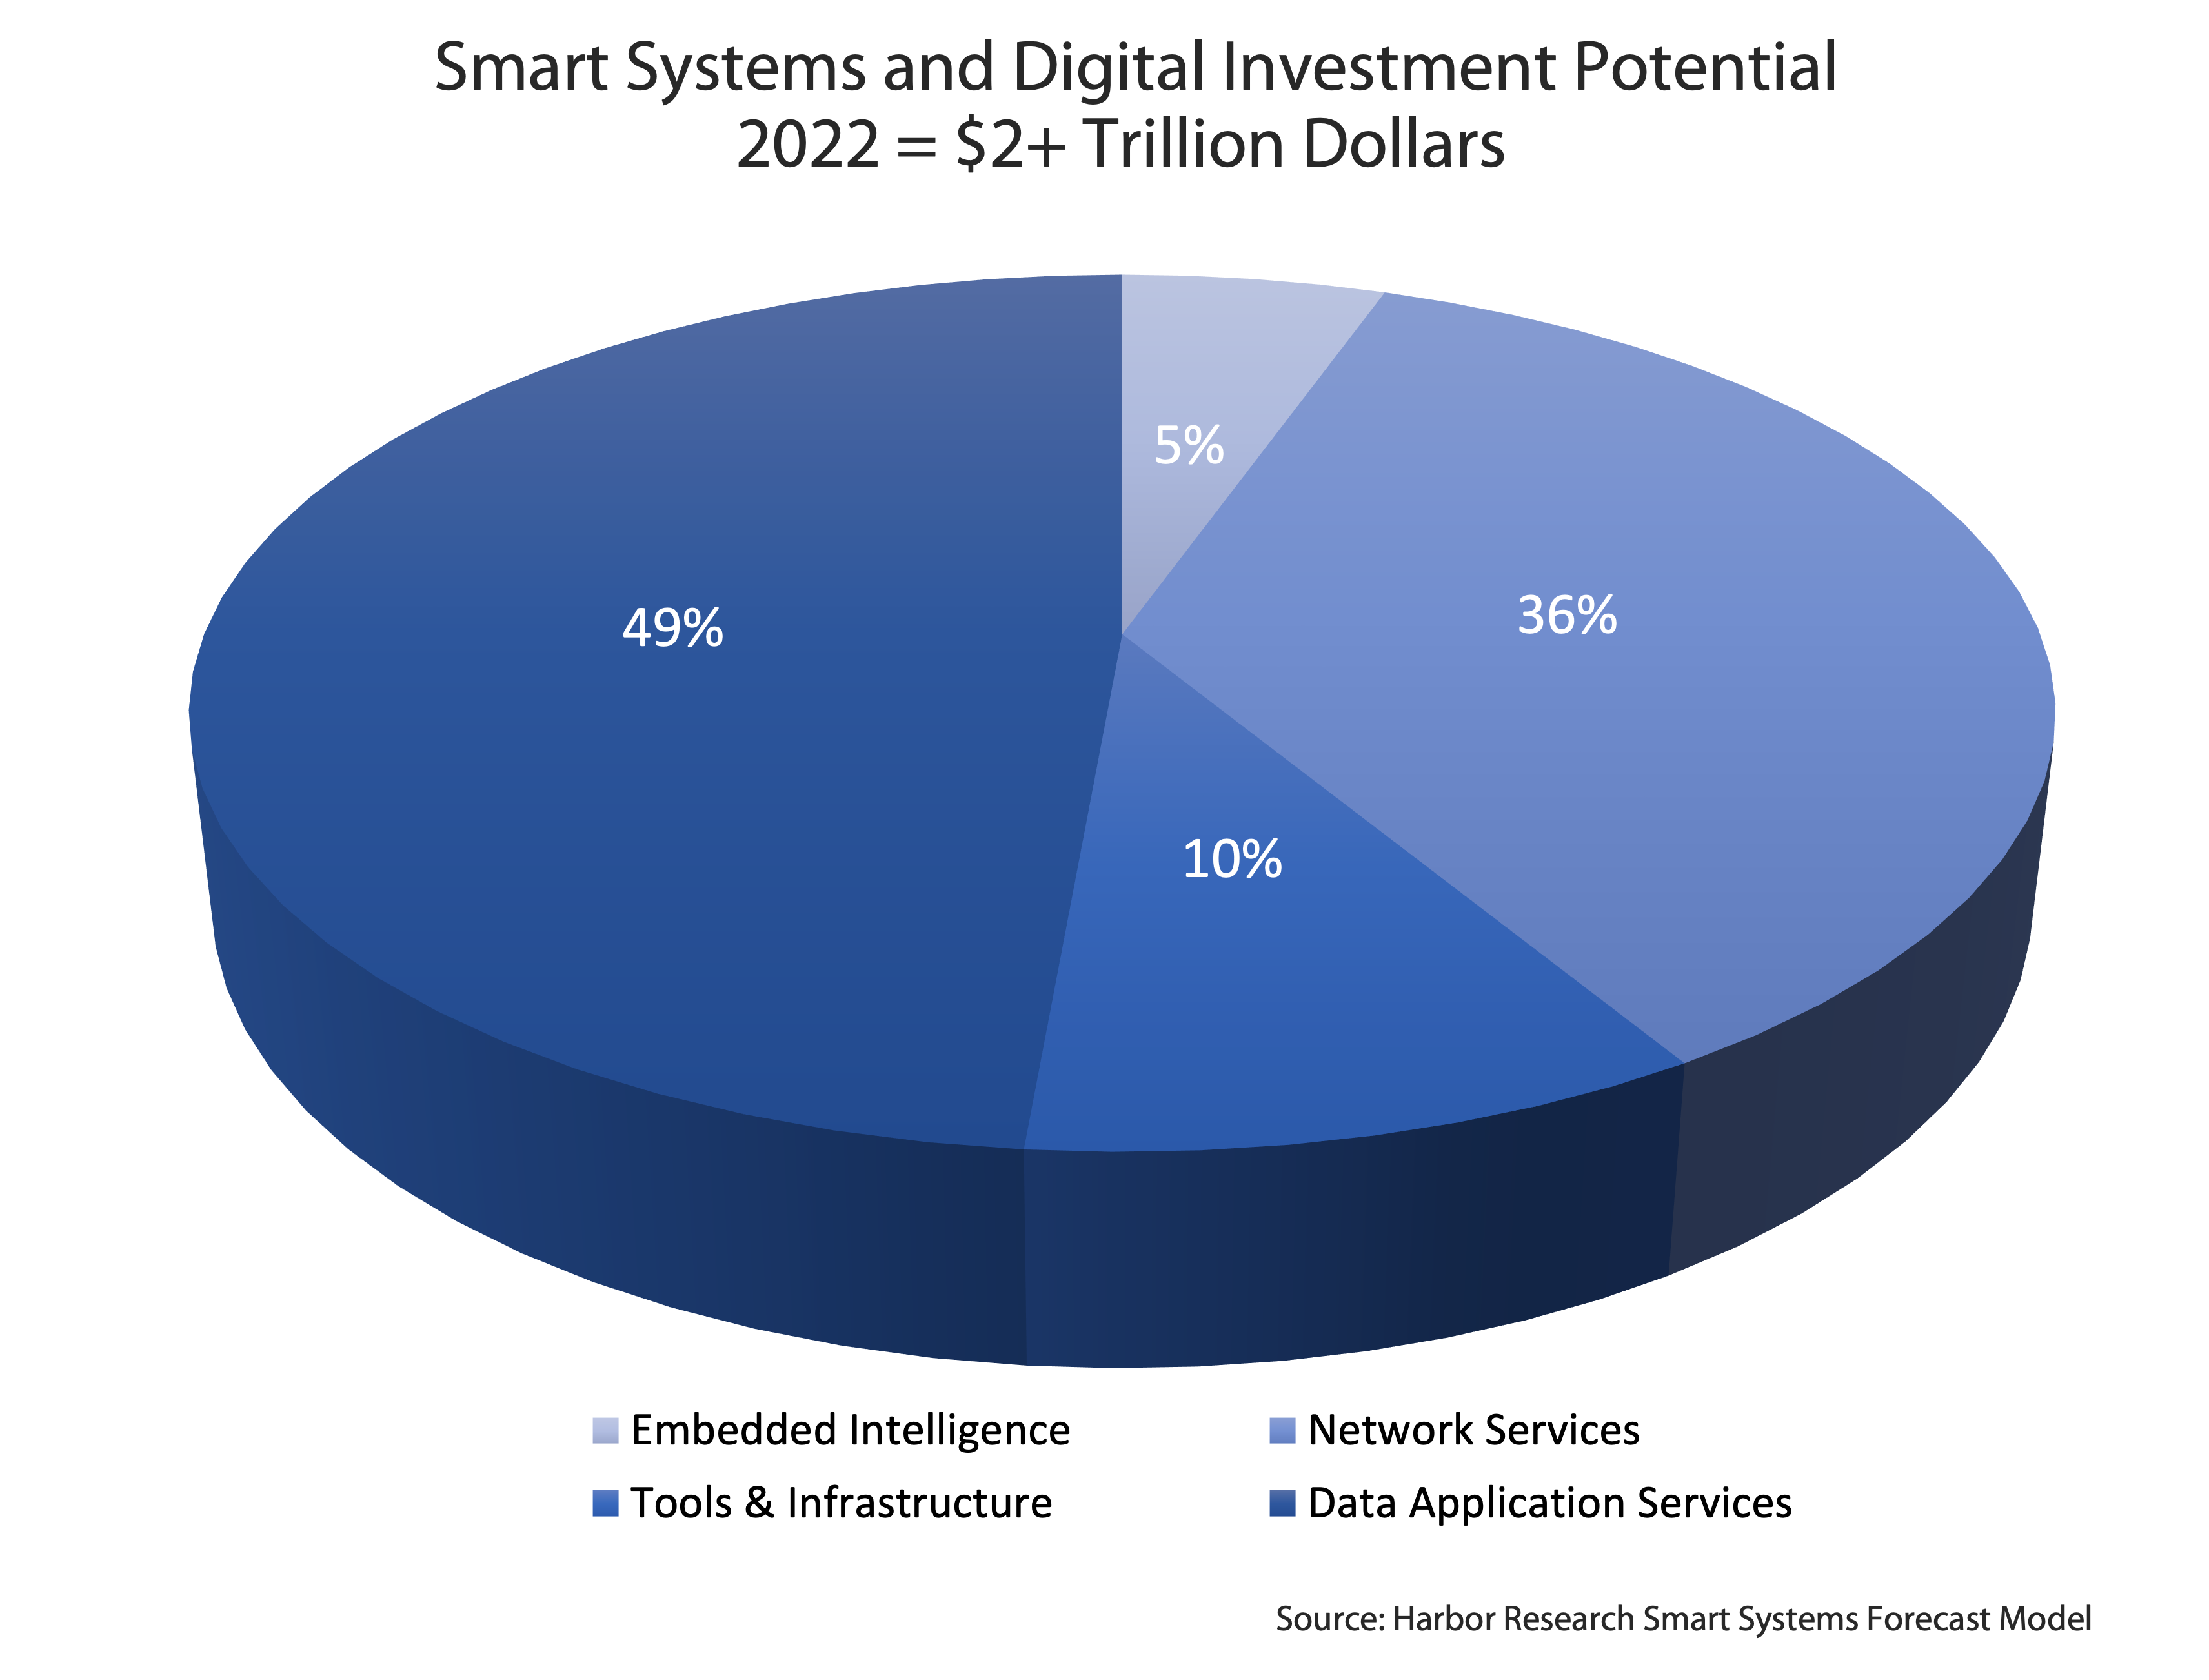 Dmart Systems and Digital Investment Potential